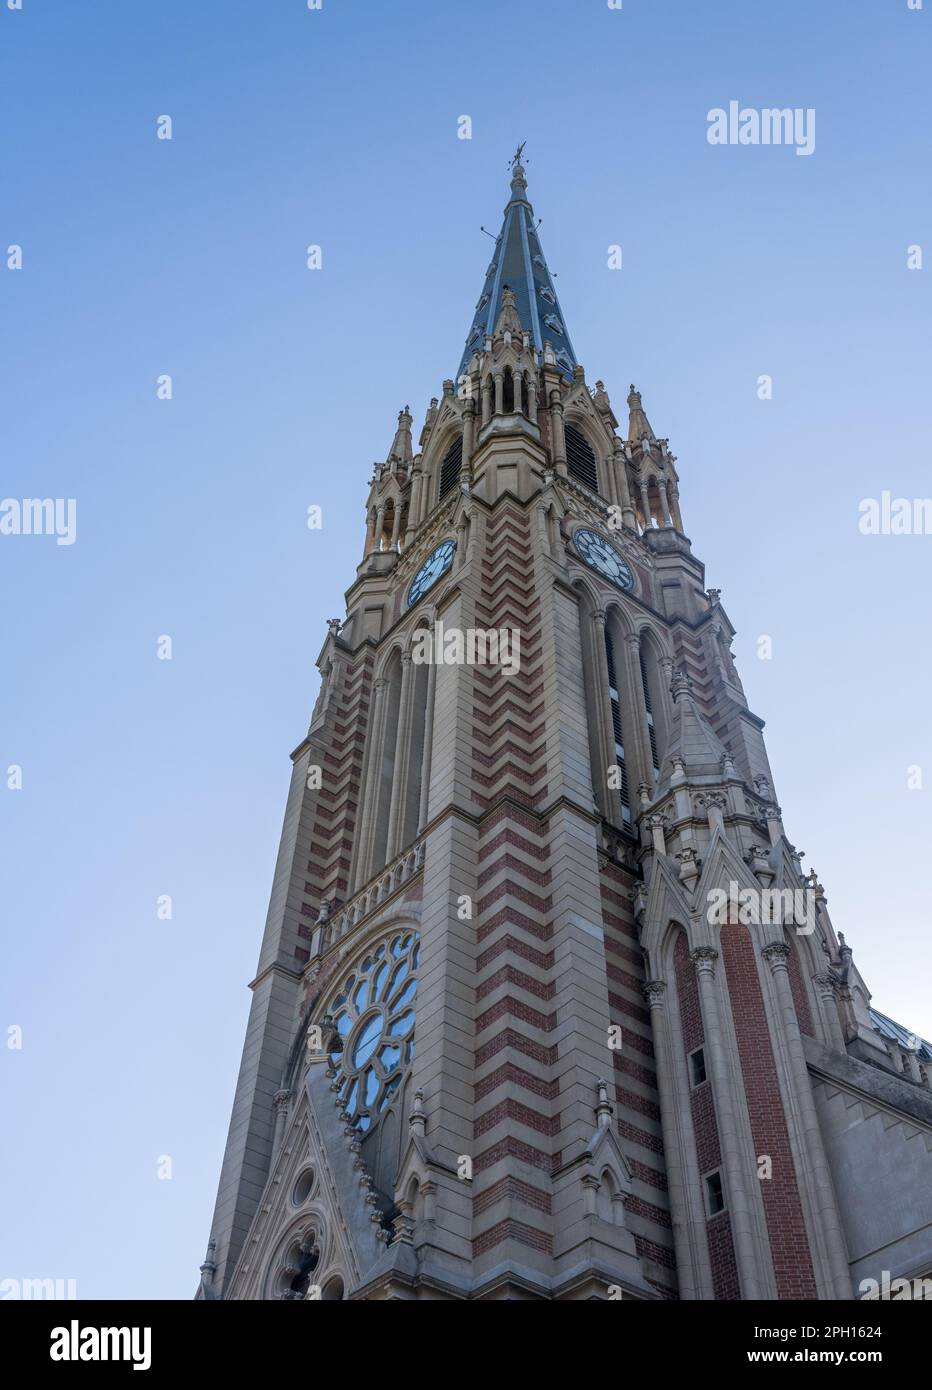 View up the tall church spire of San Isidro cathedral near Buenos Aires in Argentina Stock Photo